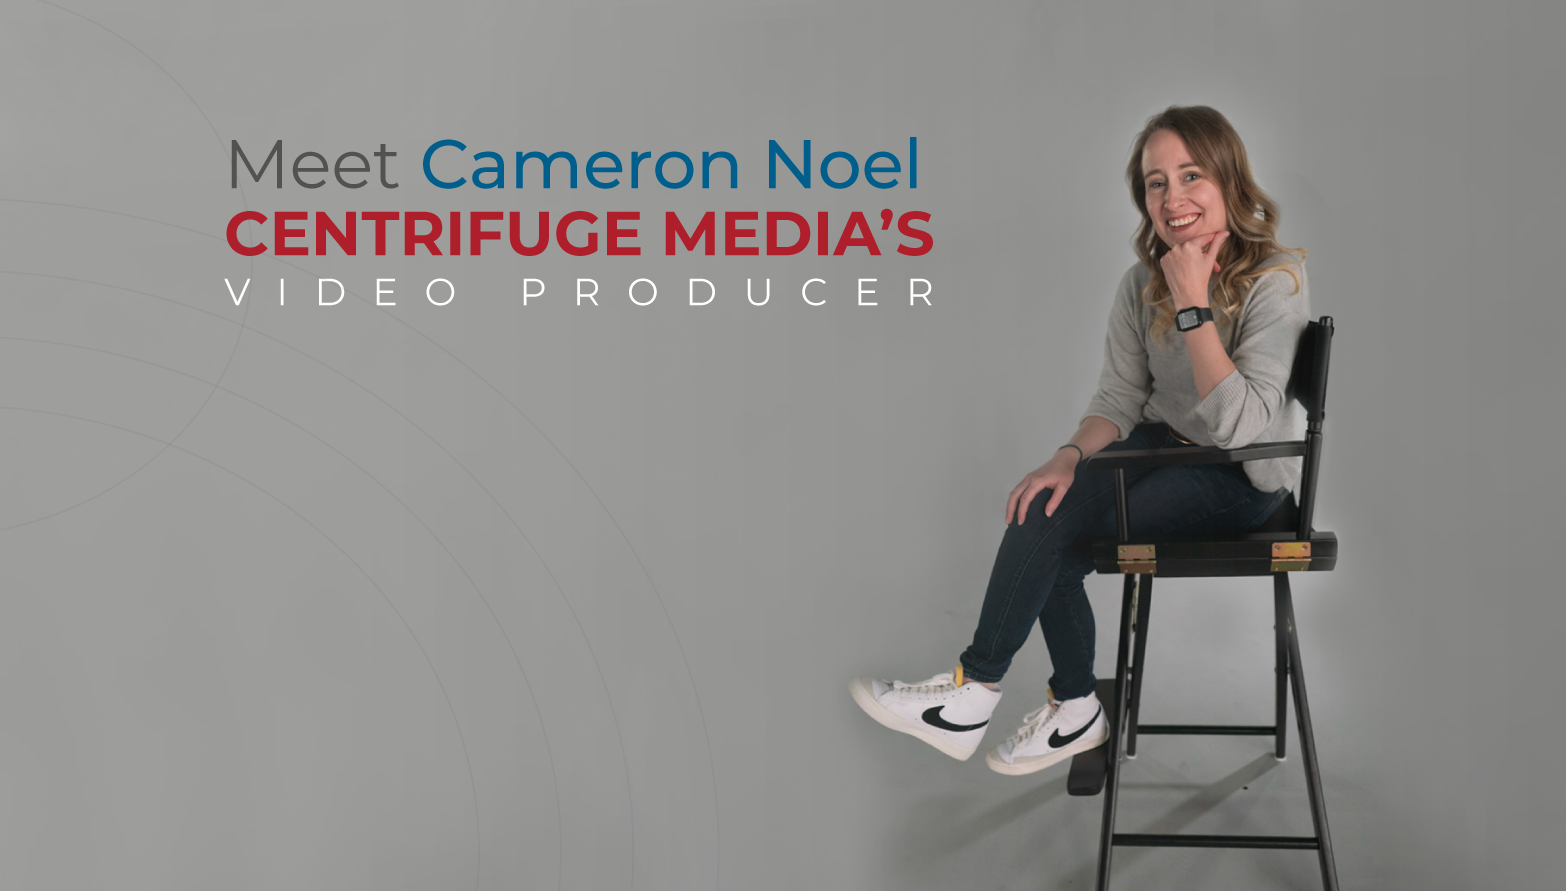 Q&A with Cameron Noel: Video Producer